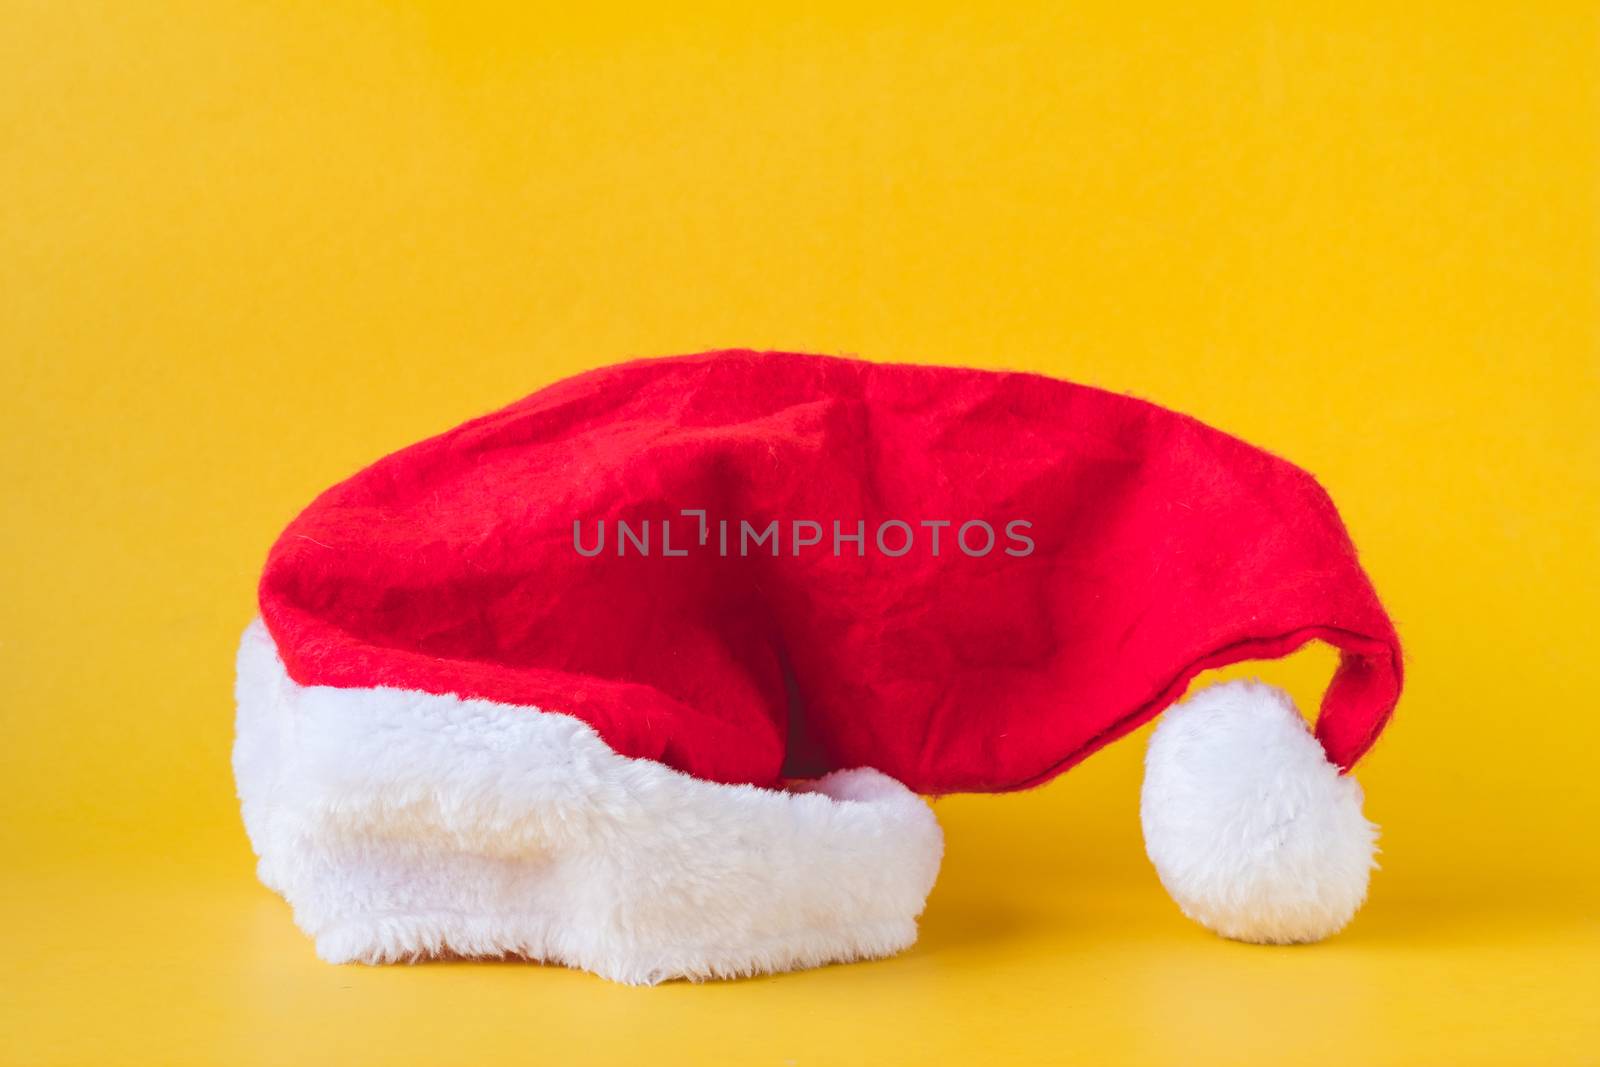 Santa Claus red hat on yellow background. Christmas concept